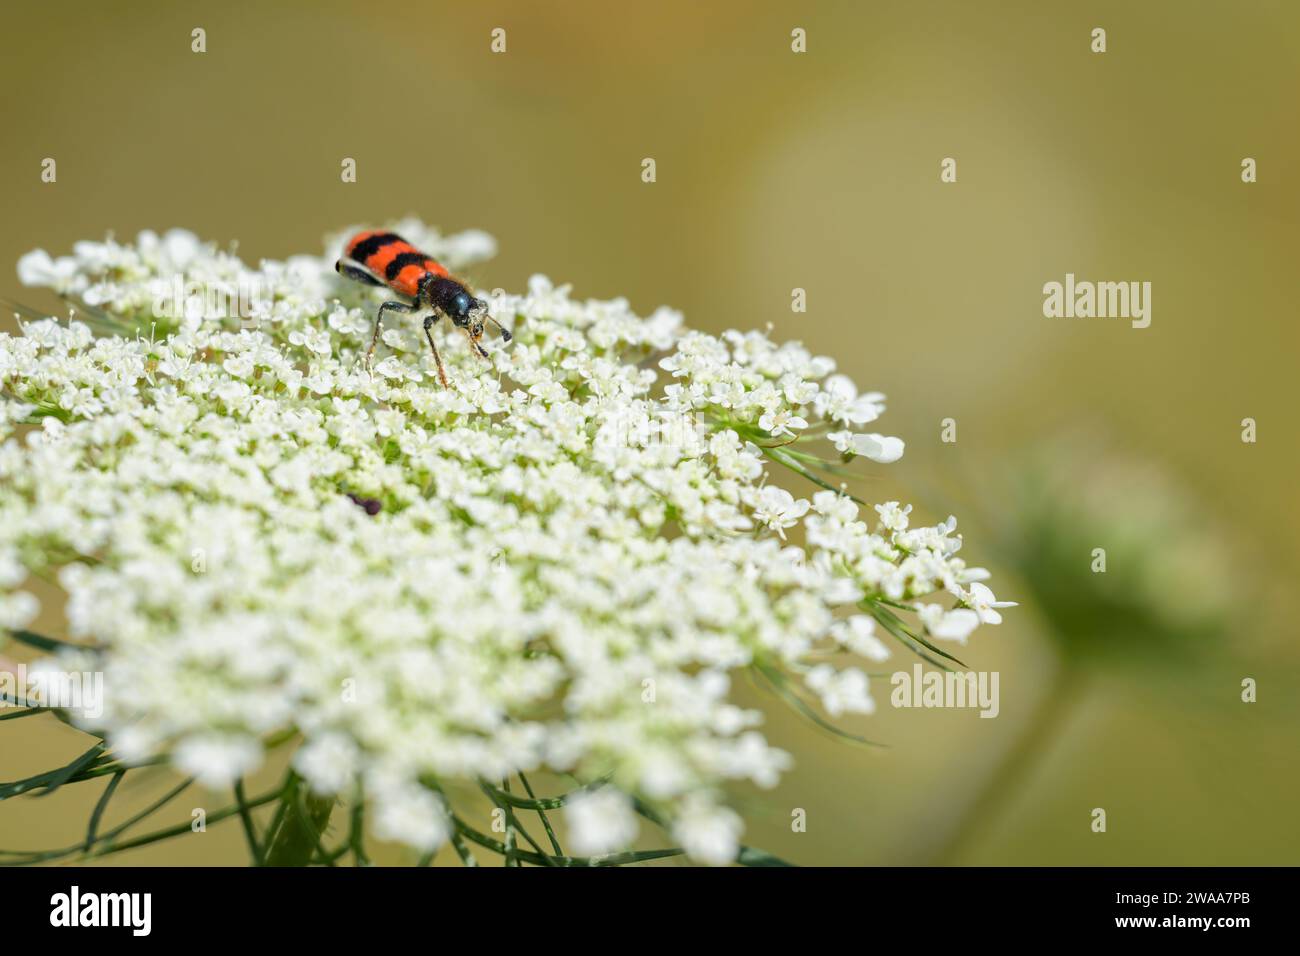 A checkered beetle (Trichodes apiarius) sitting on a white umbellifer, sunny day in summer, Vienna (Austria) Stock Photo